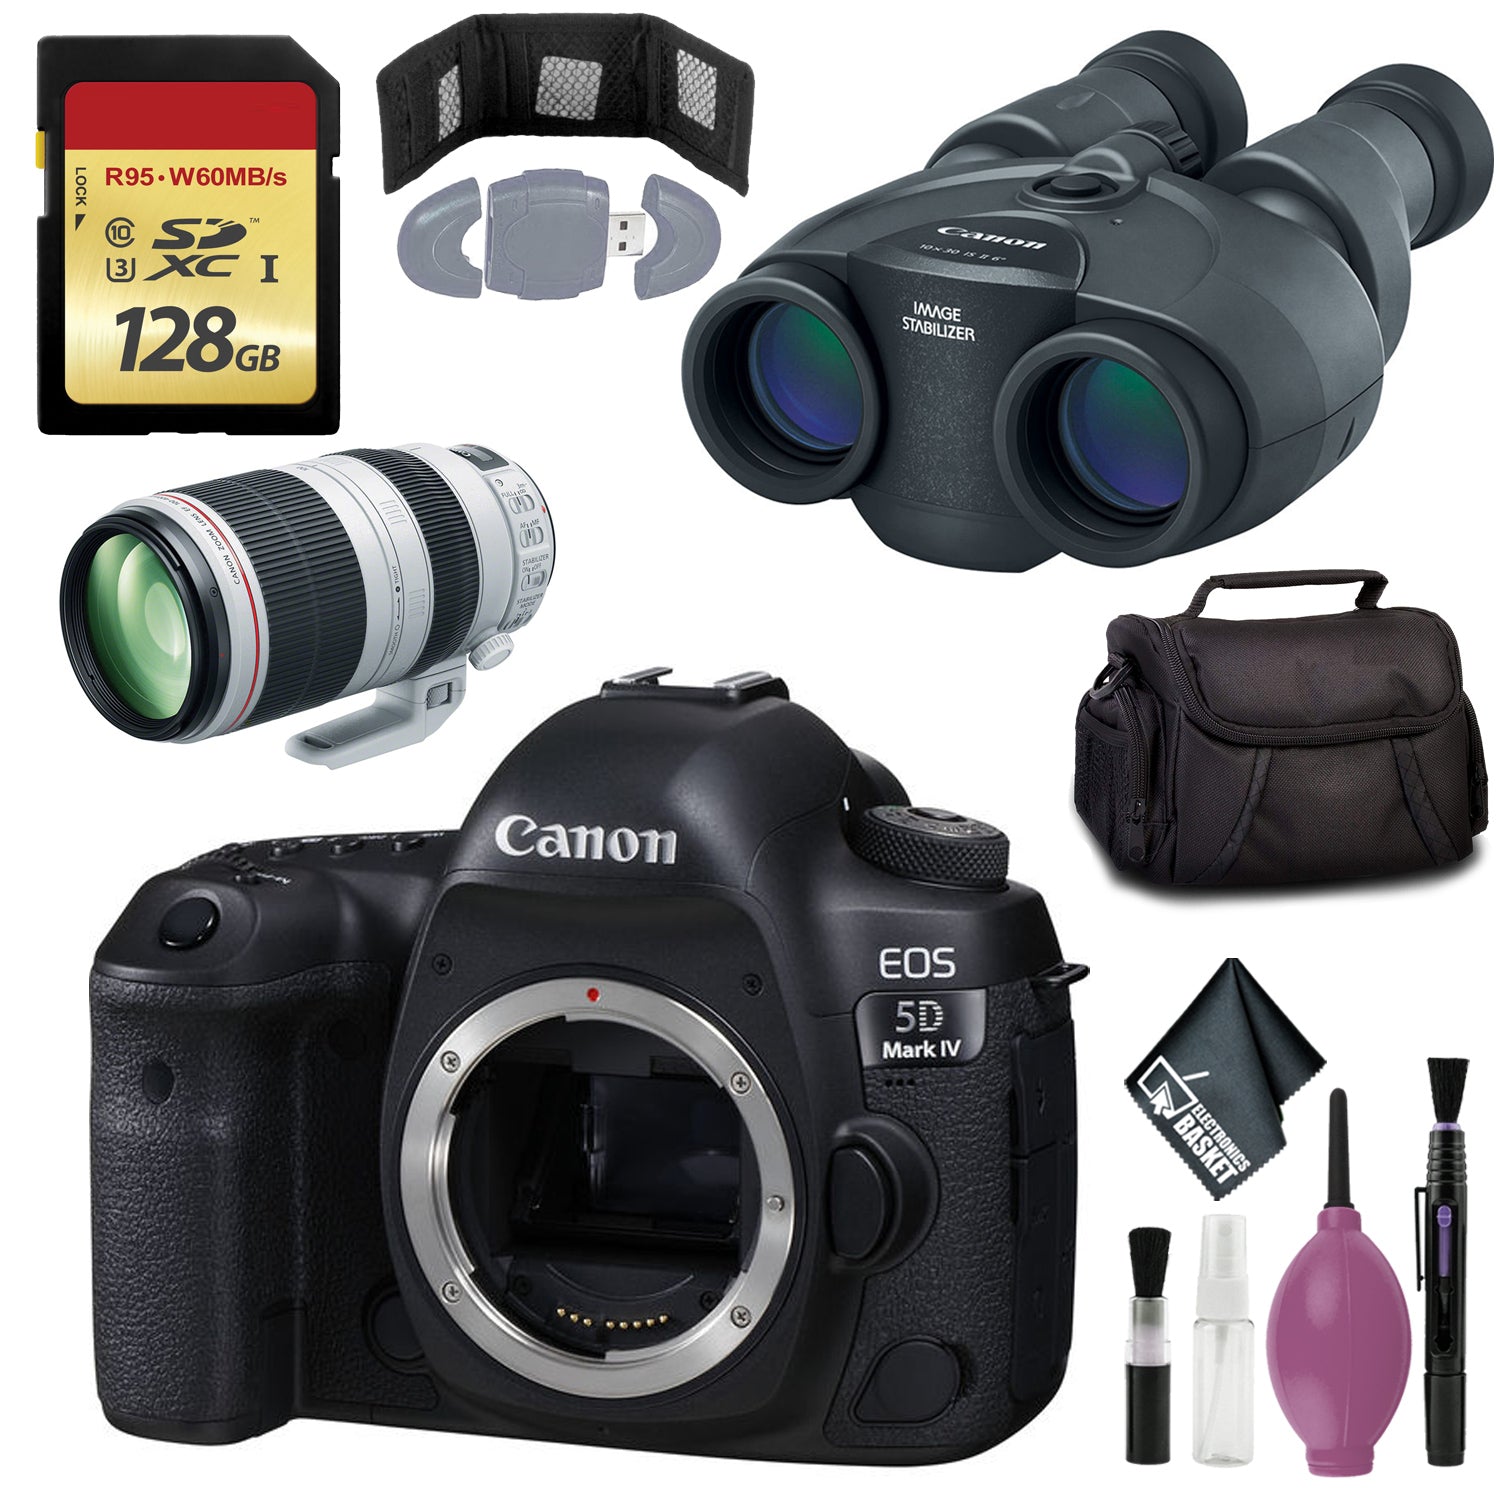 Canon 10x30 IS II Image Stabilized Binocular - Canon EOS 5D Mark IV DSLR Camera - 128GB Card - Card Wallet - Reader - Case